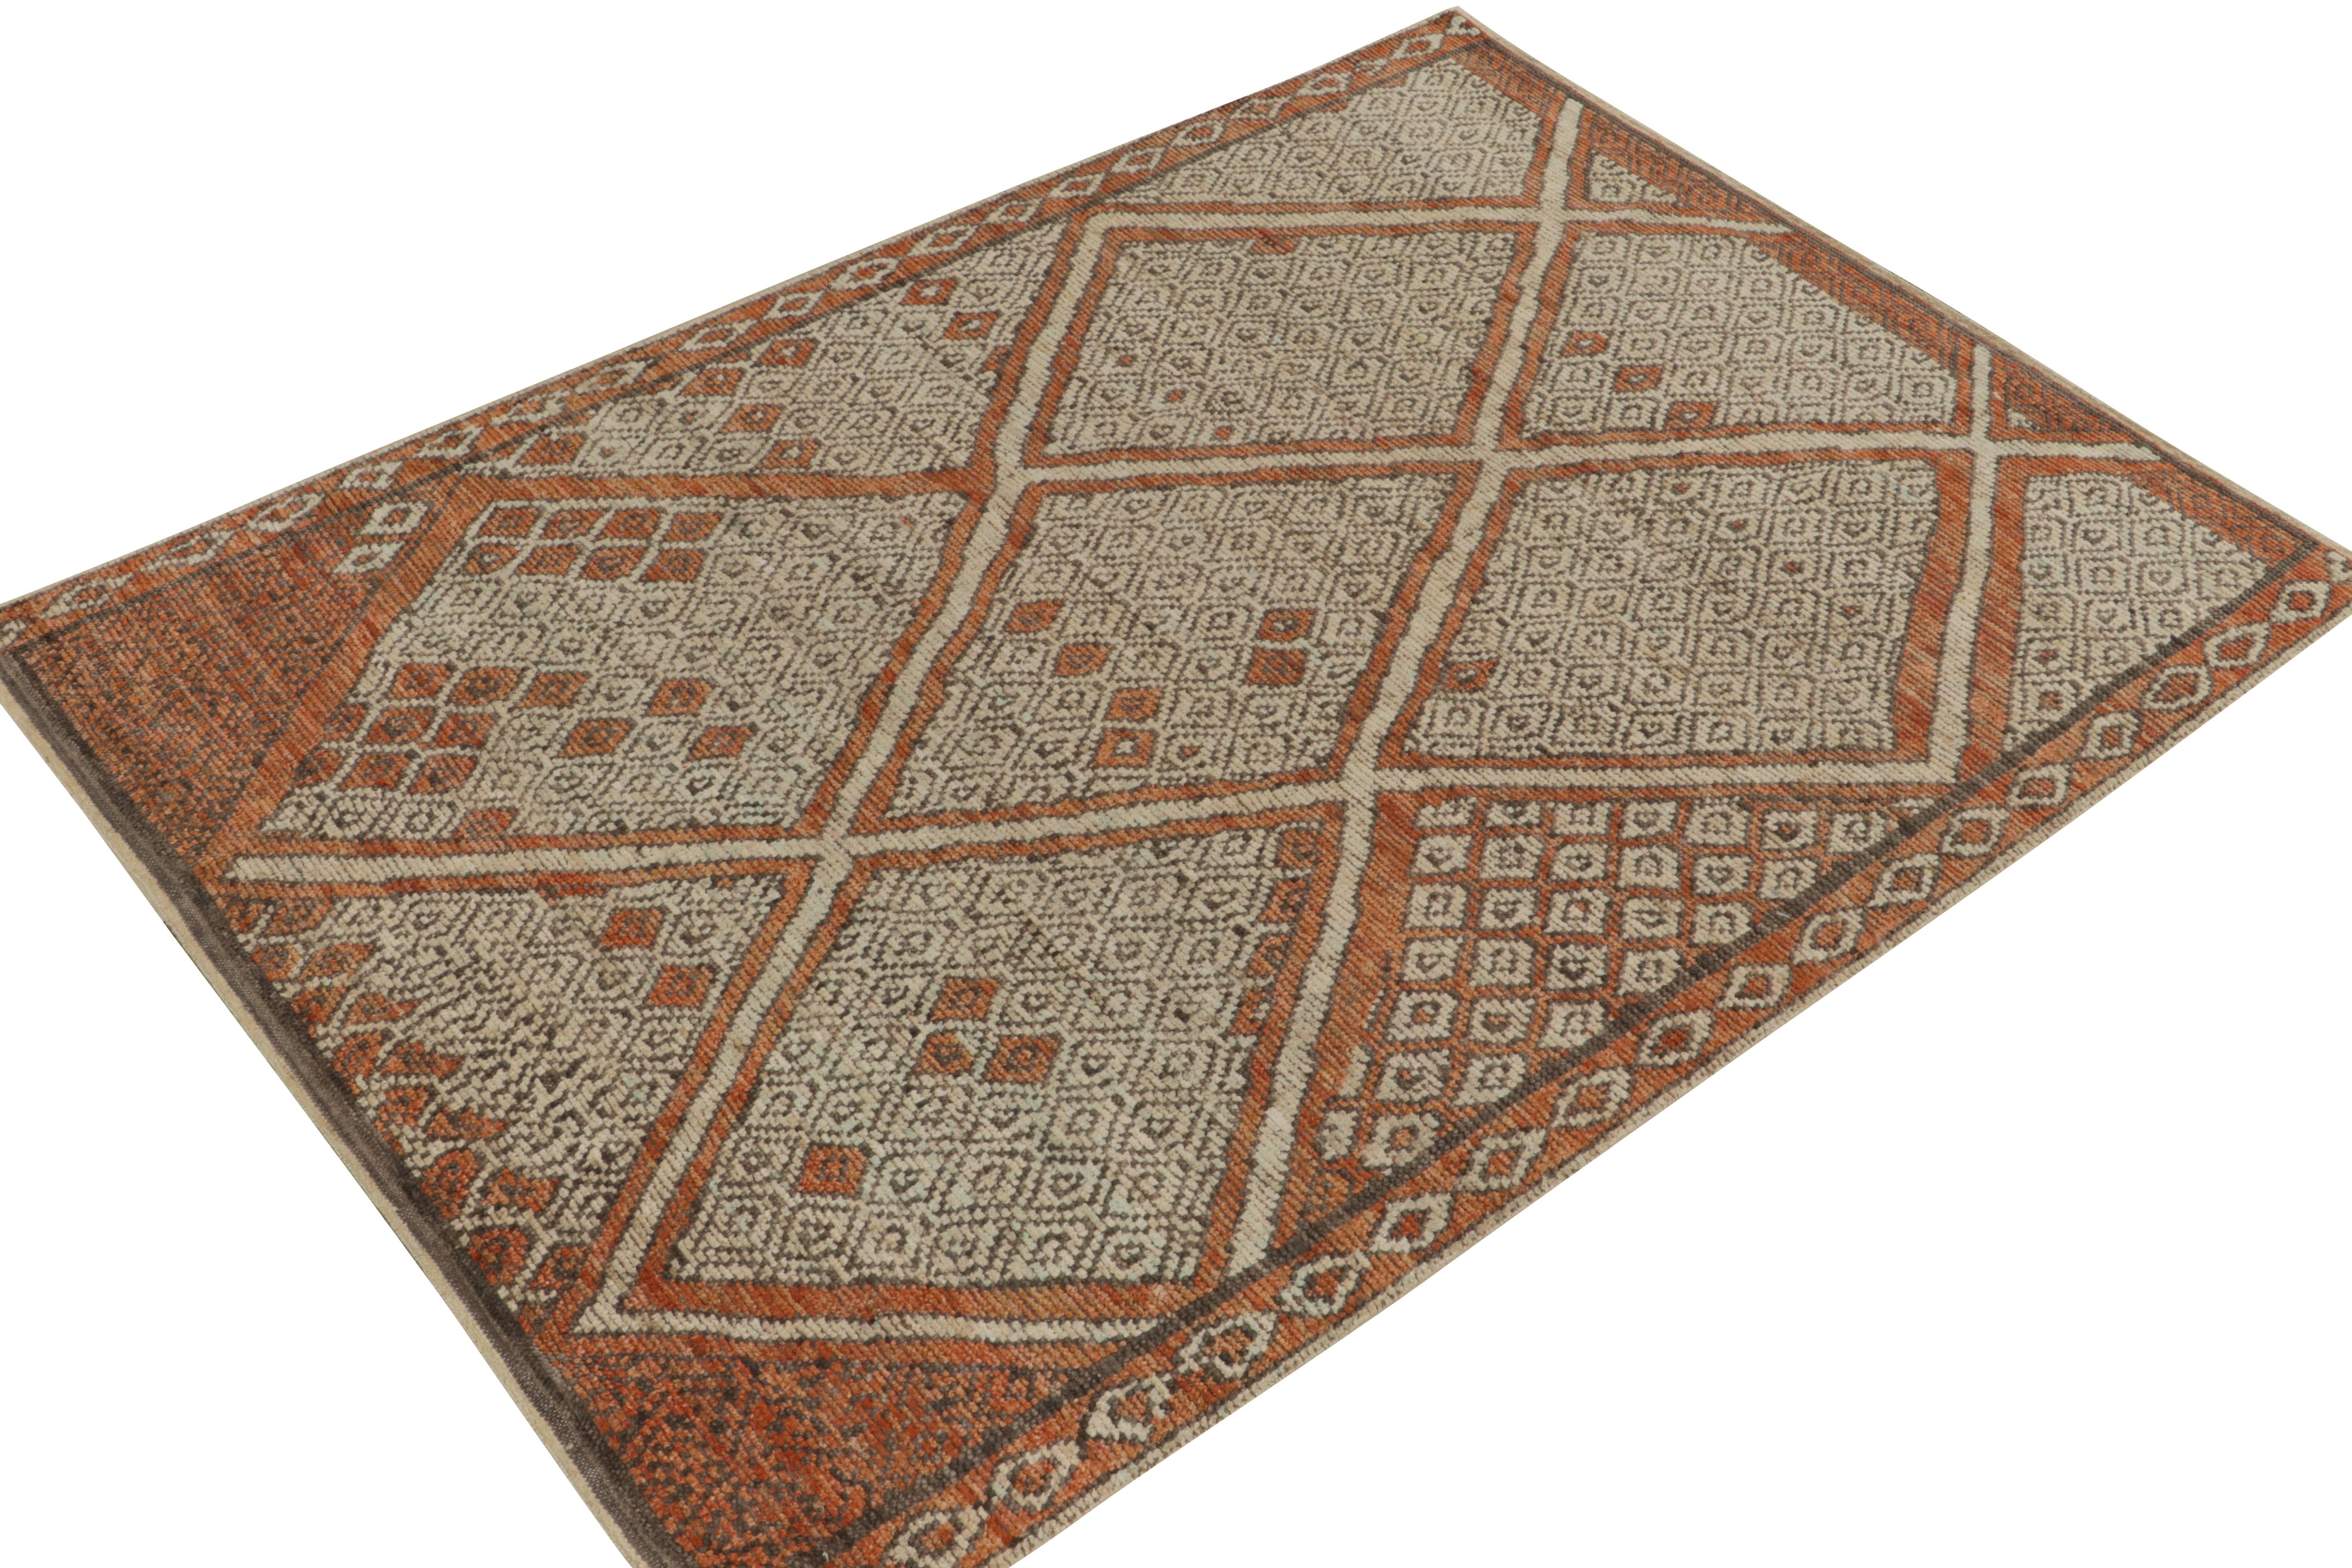 Hand-knotted in fine wool, a 7x9 Moroccan style piece from Rug & Kilim exemplifying their bold new take on this style. 

On the Design: The carpet enjoys scintillating pagination with archaic diamond patterns in rust orange, white & beige-brown.